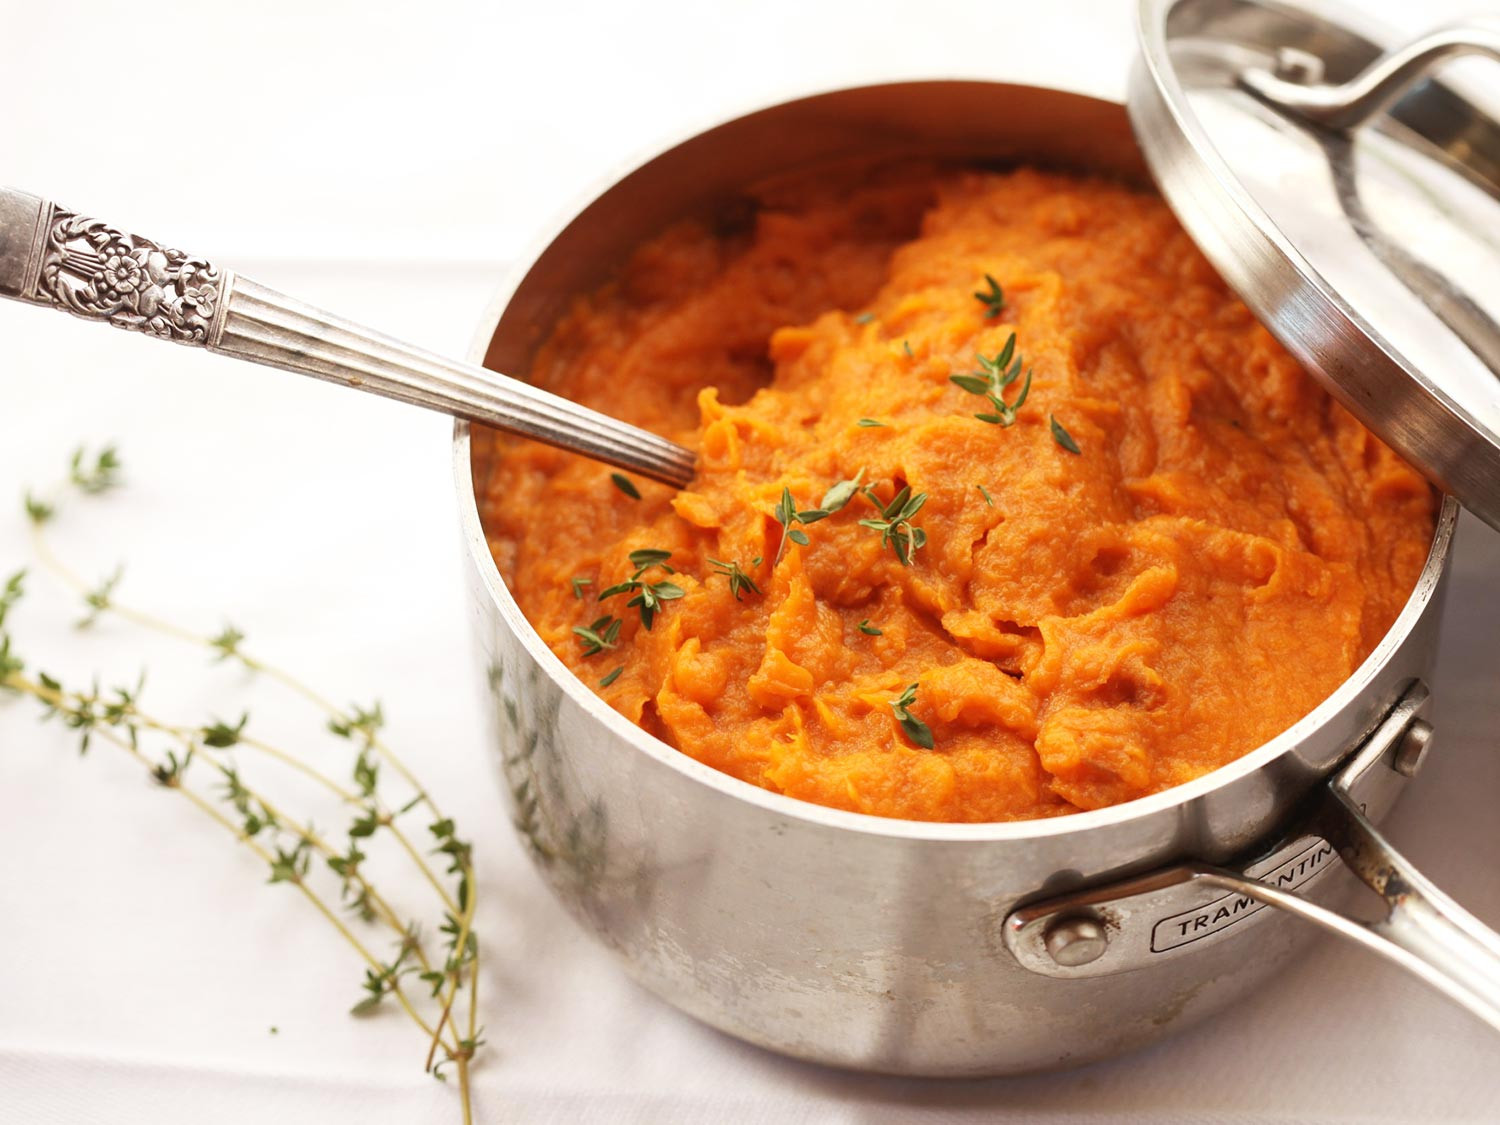 Mashed Sweet Potatoes Microwave
 The Best Mashed Sweet Potatoes Recipe